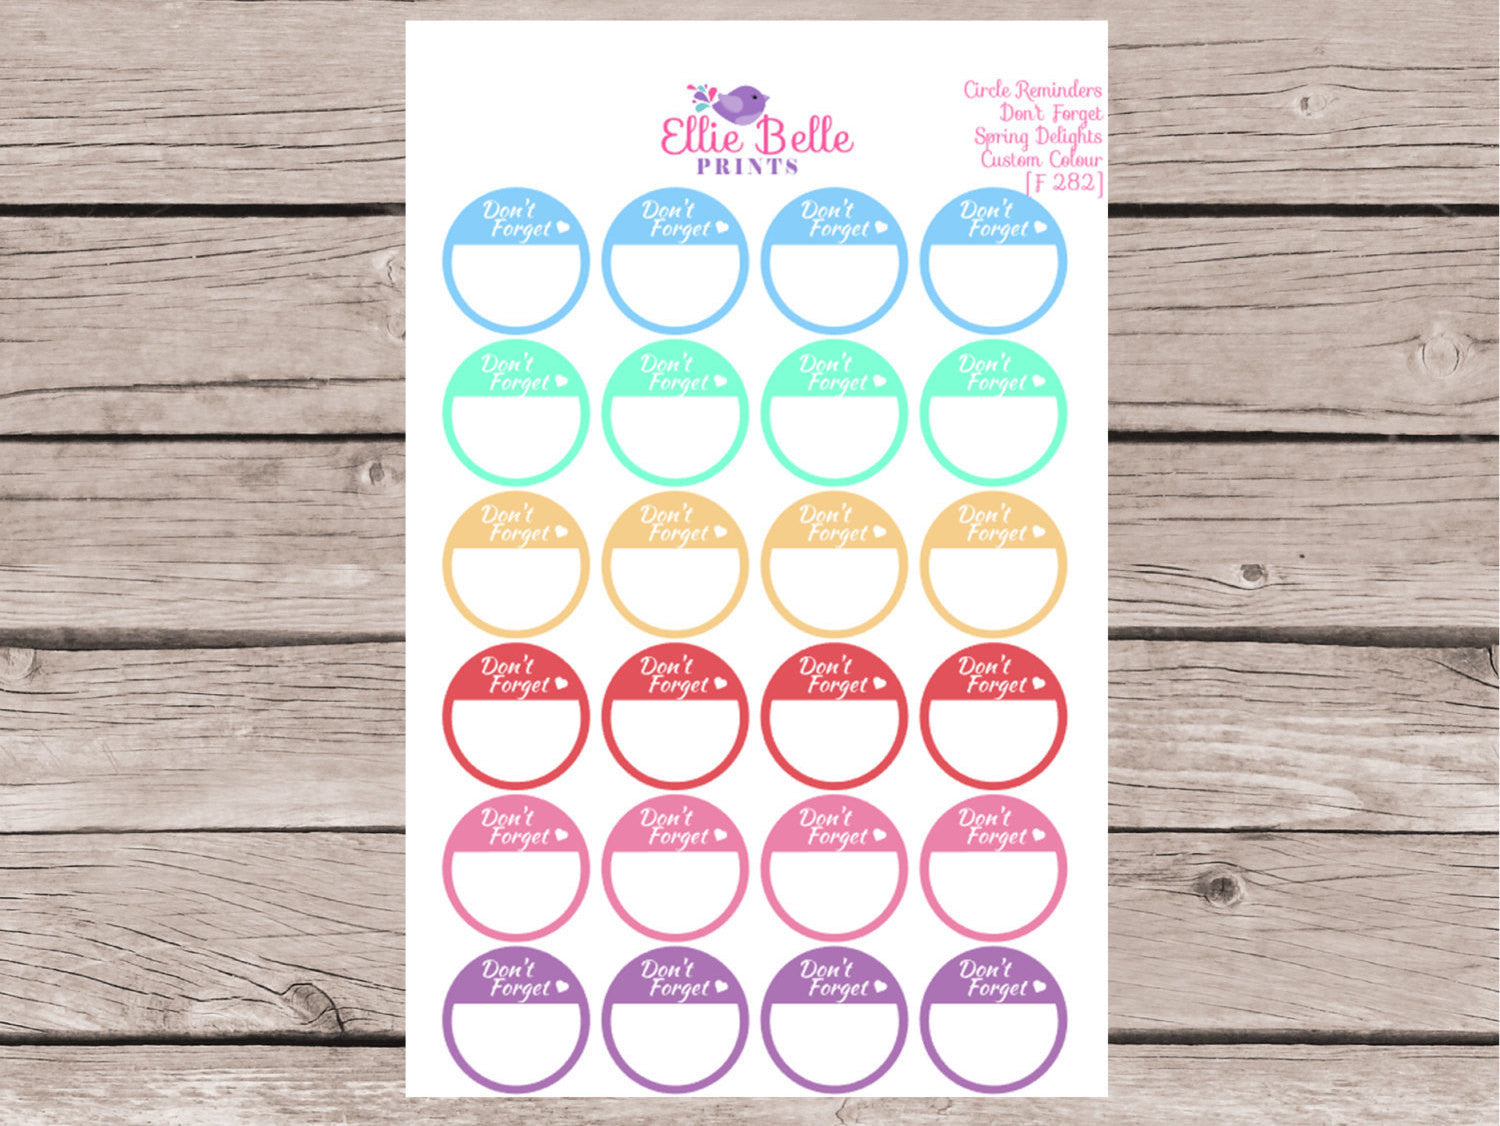 Don't Forget Circle Reminder Stickers - Spring Delights [282]